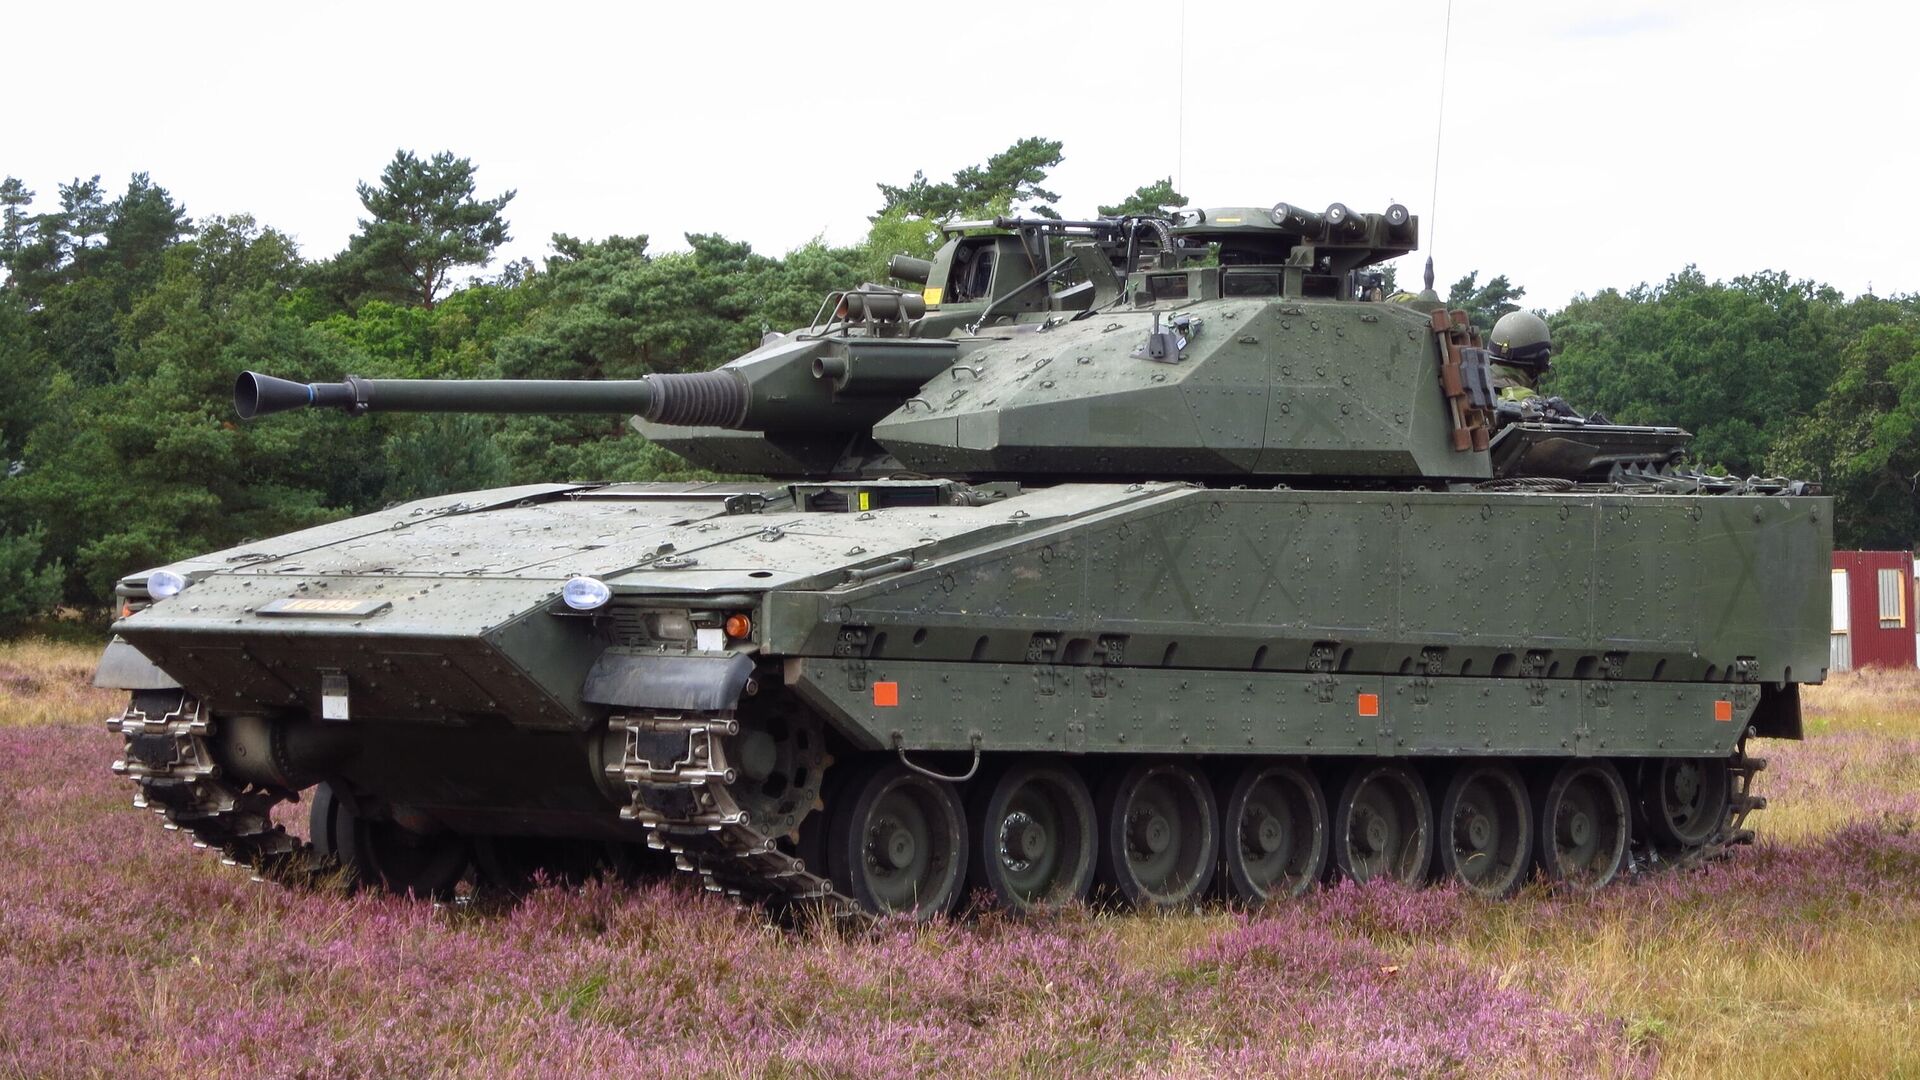 Russian Forces Capture Swedish Cv90 Ifv In Special Op Zone For The First Time